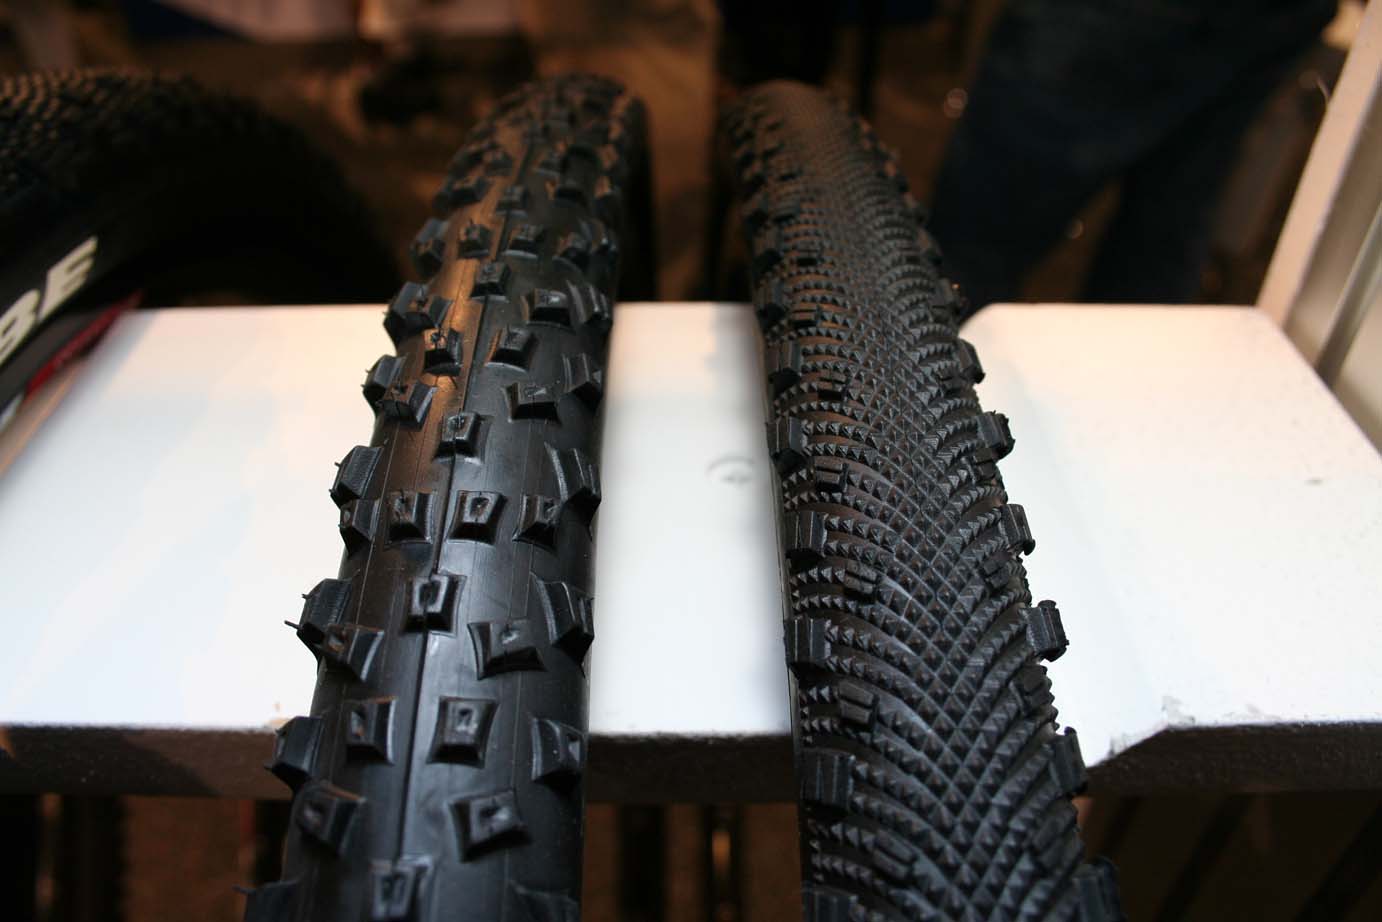 Schwalbe showed off its Sammy Slick and Rocket Ron cyclocross tires.